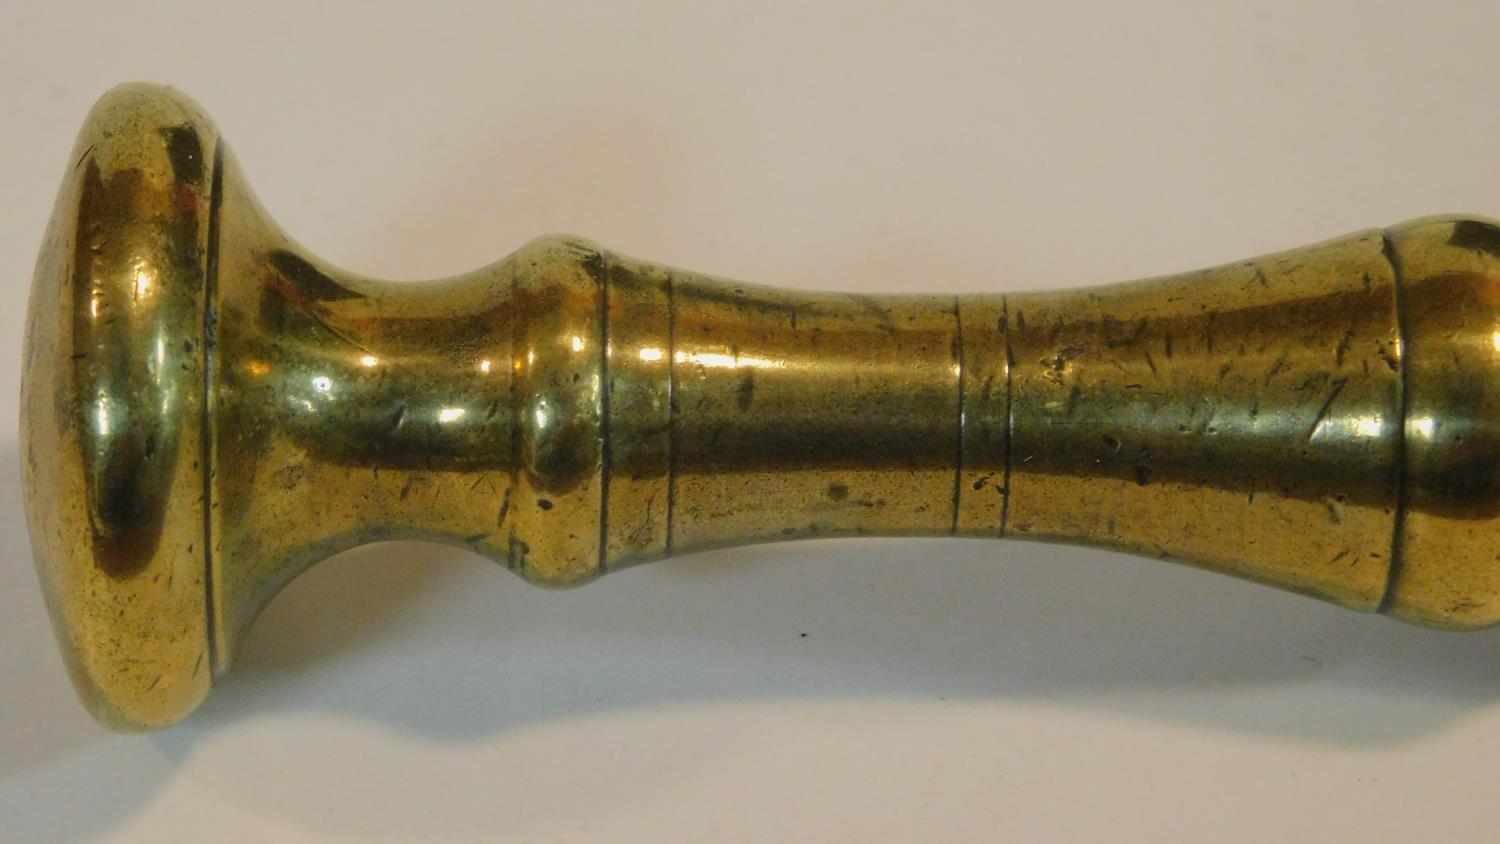 An antique bronze handled mortar and brass pestle. The handle has a textured design and the front of - Image 5 of 8